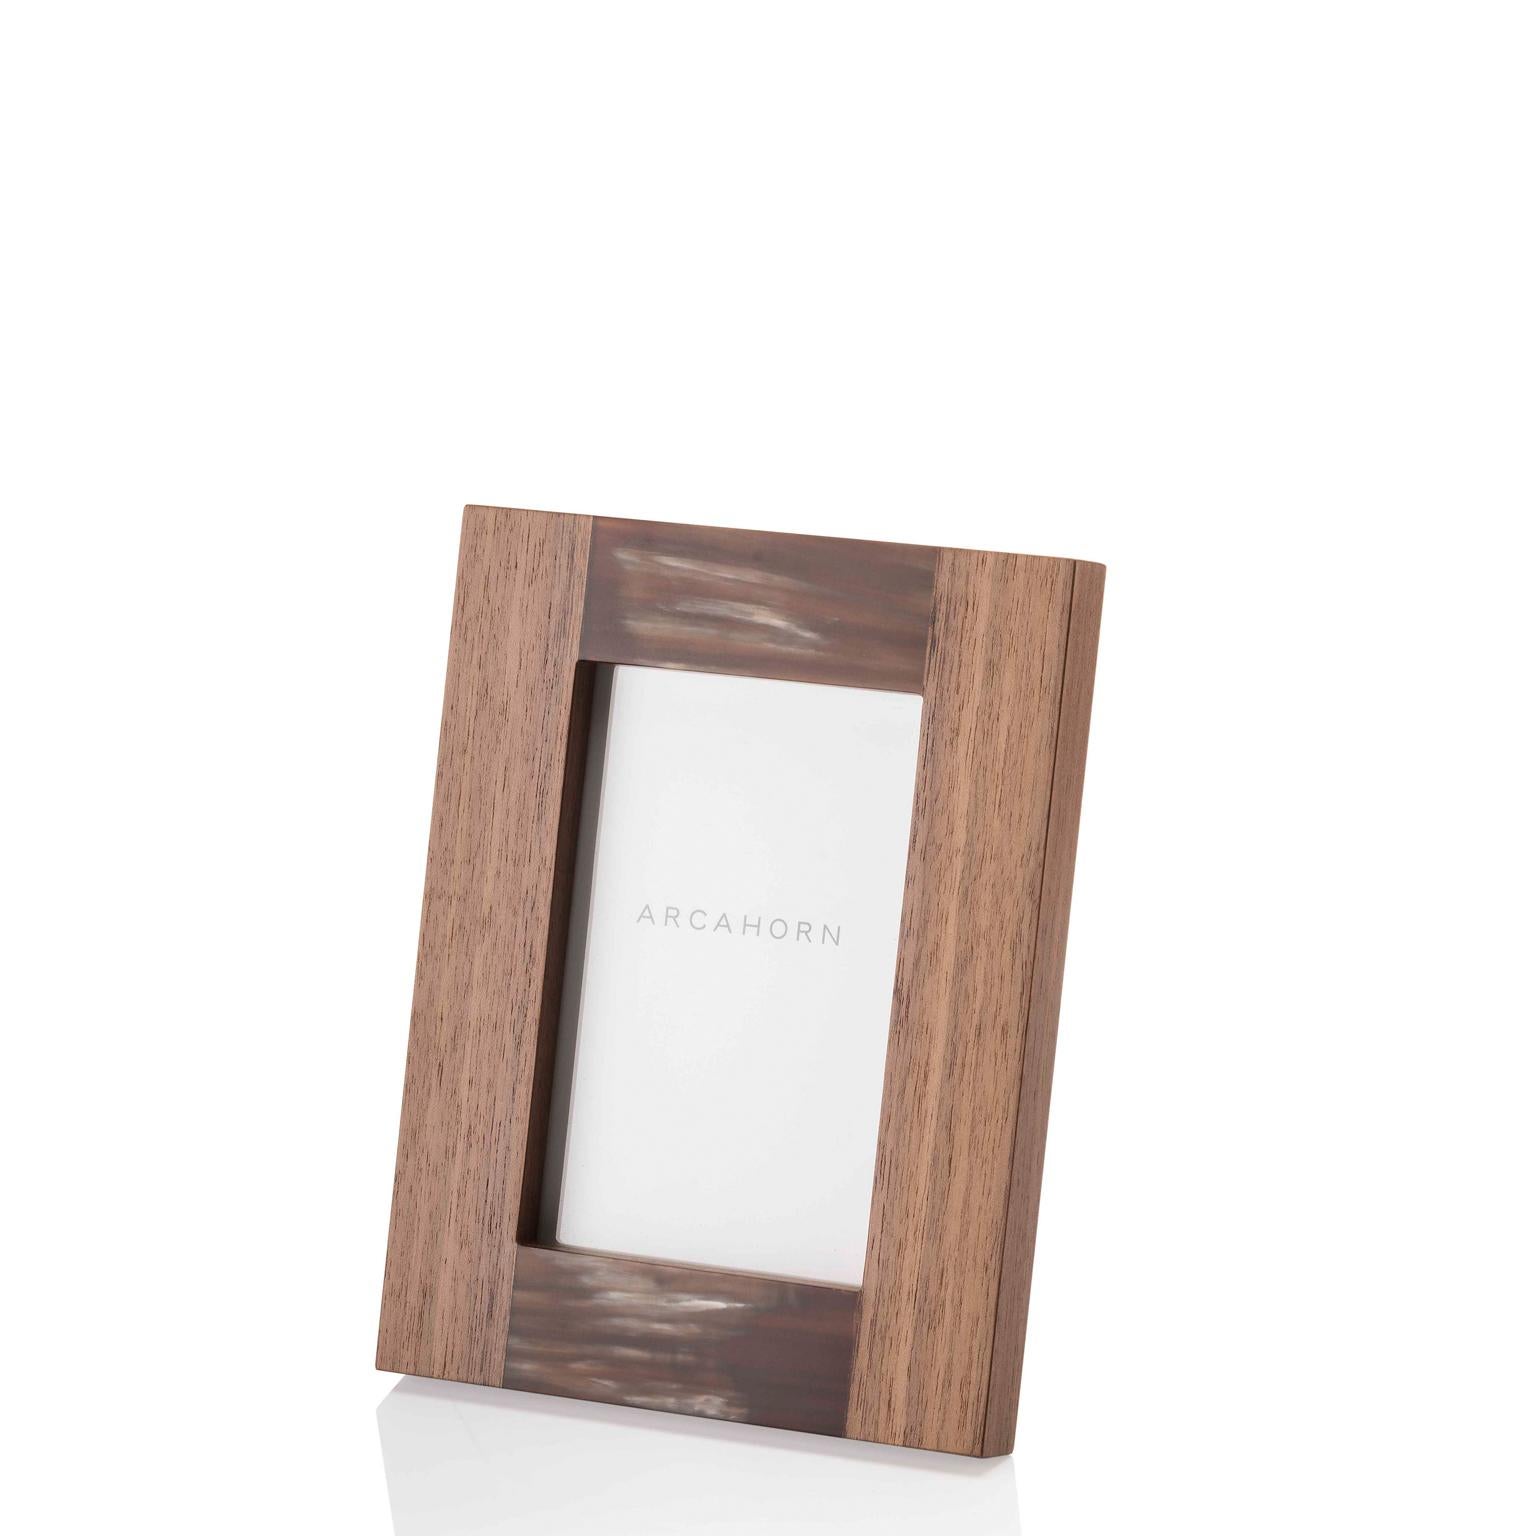 Featuring a classic rectangular shape, the Medea picture frame in Canaletto walnut veneer is given an elegant, textured effect by the striated brown-veined nuances of matte Corno Italiano inlays. Available in two different sizes, Medea will display